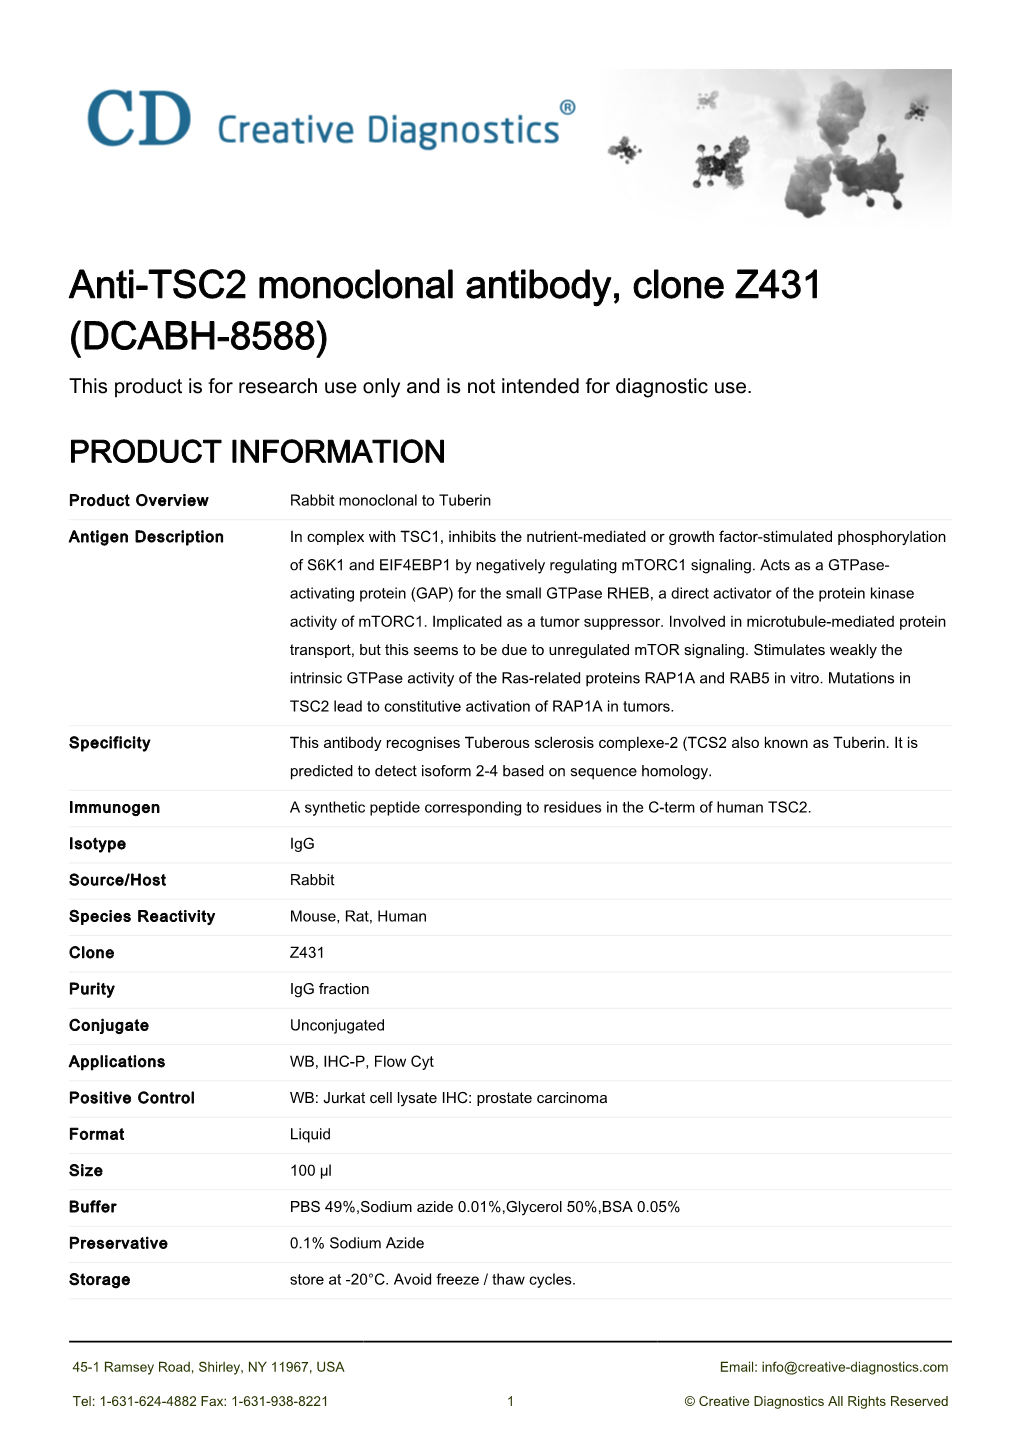 Anti-TSC2 Monoclonal Antibody, Clone Z431 (DCABH-8588) This Product Is for Research Use Only and Is Not Intended for Diagnostic Use